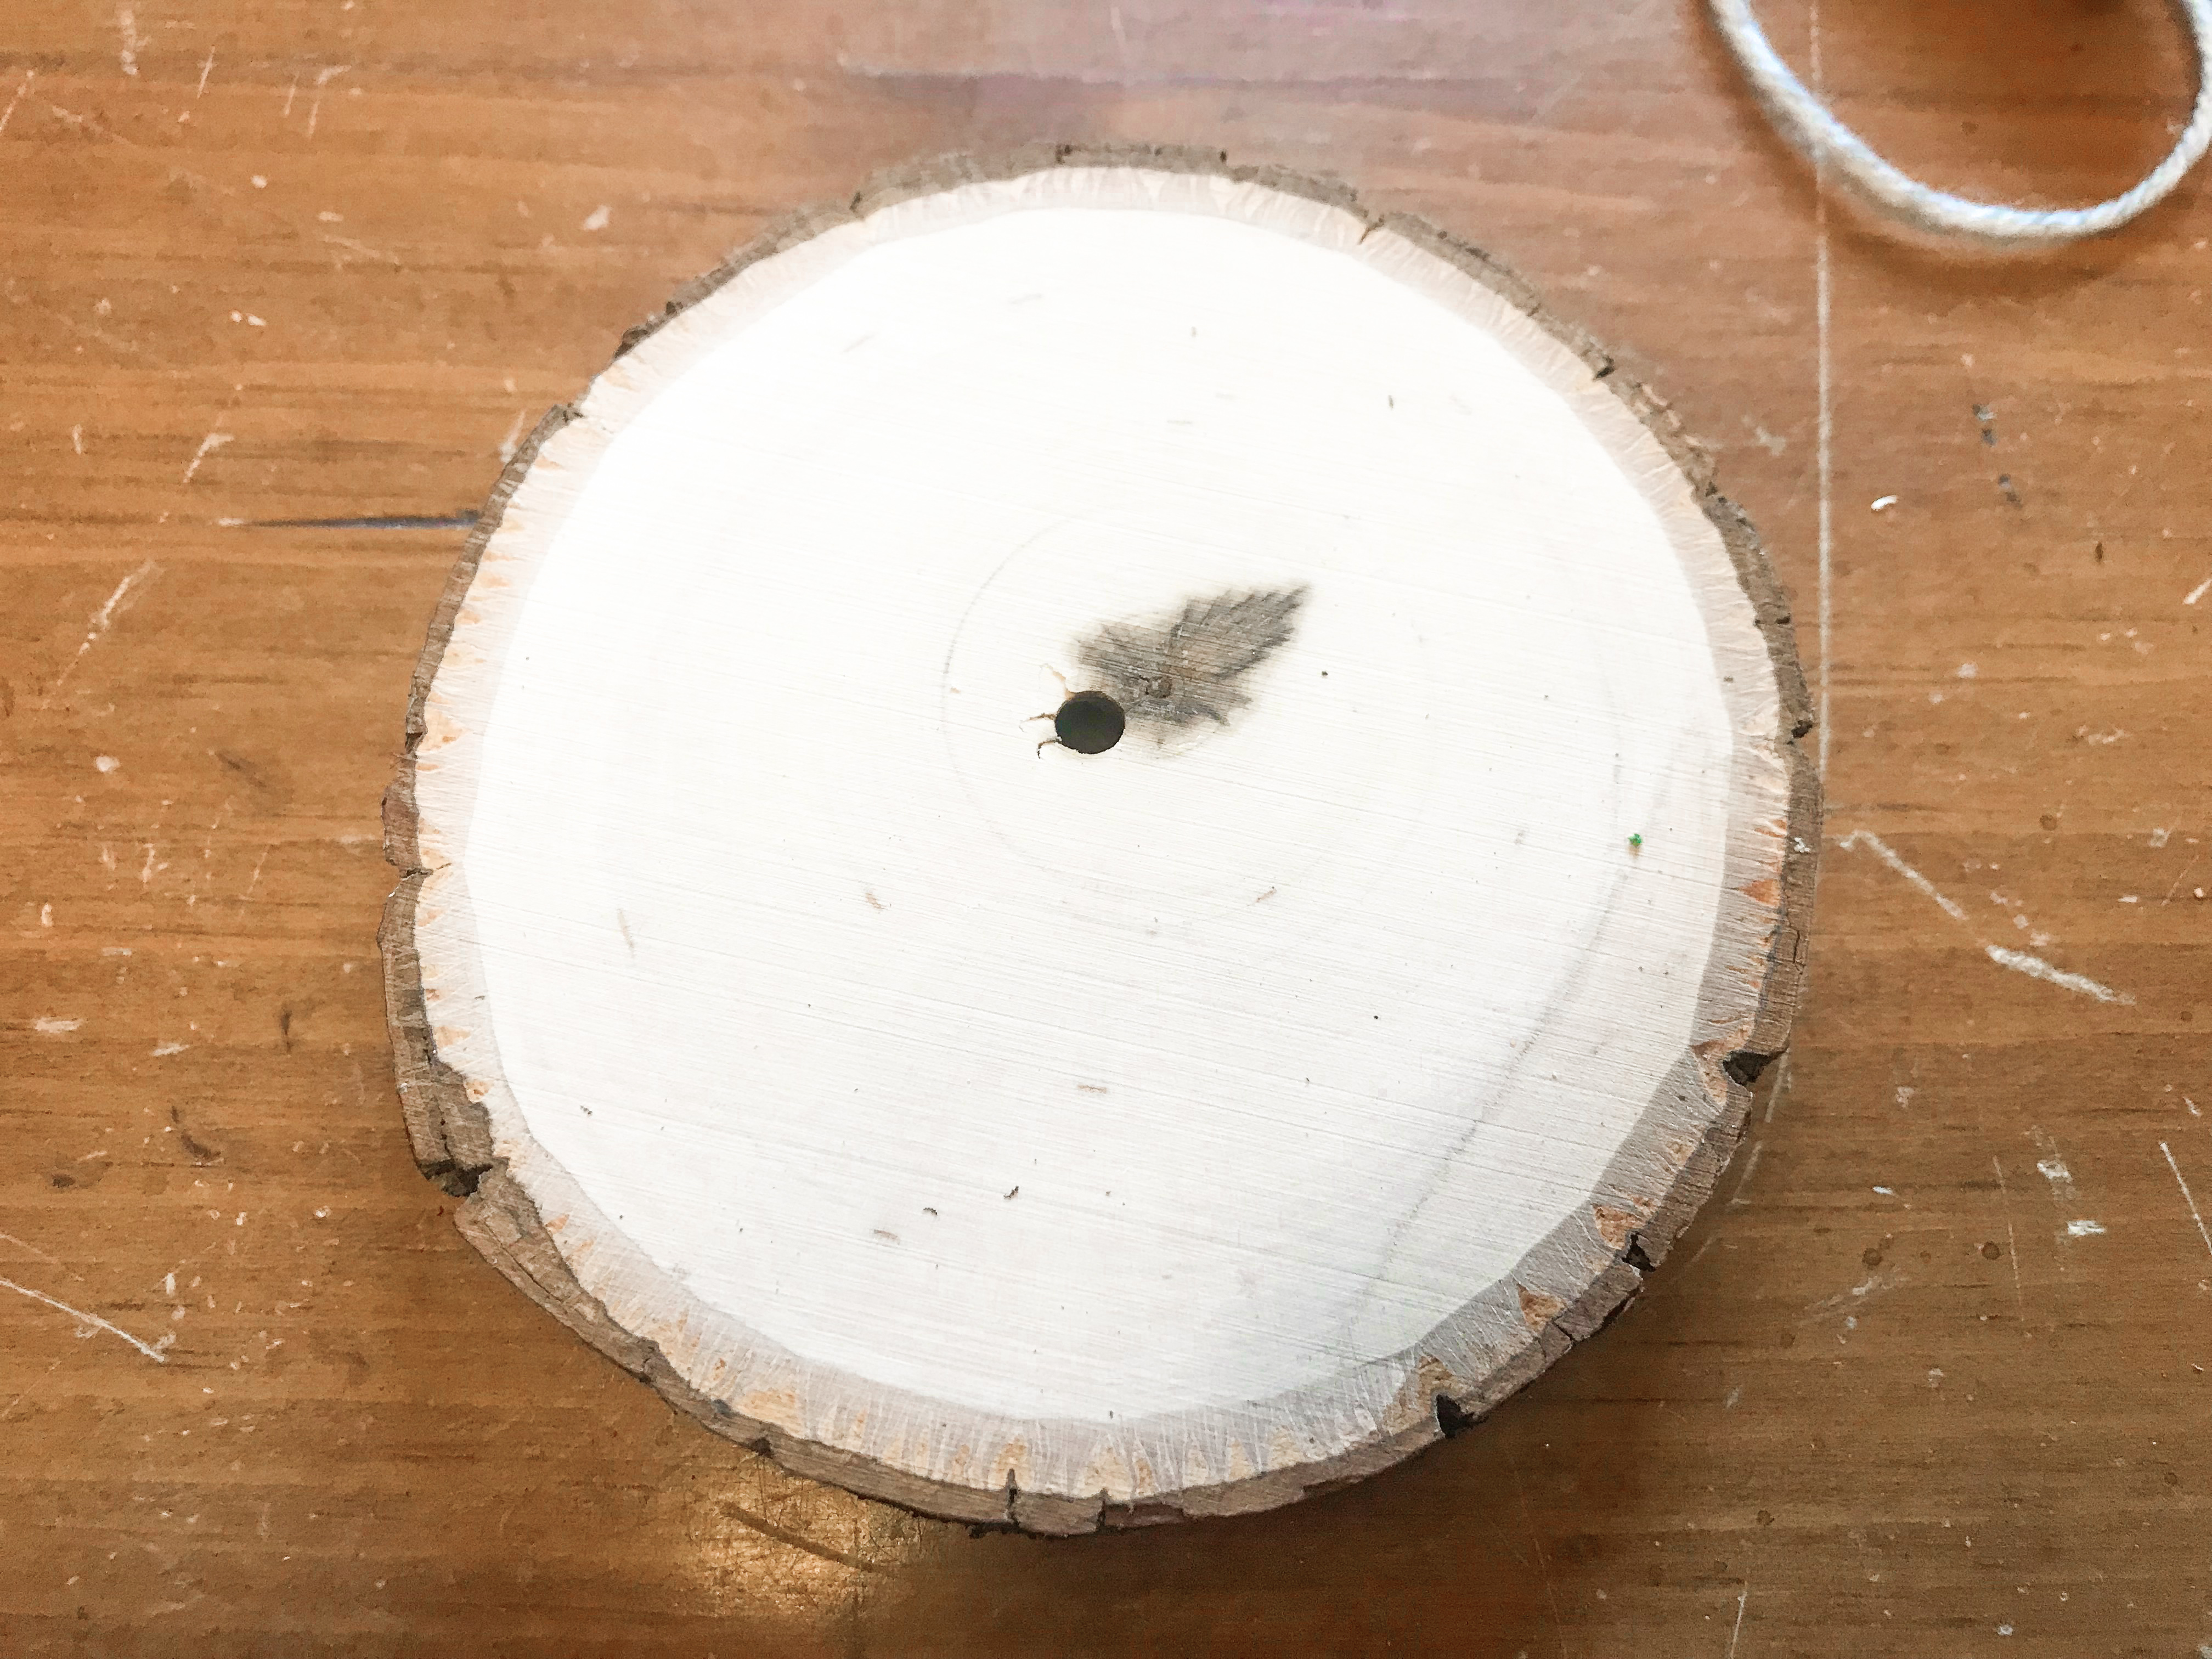 Underside of round wood slice with small hole drilled in the center on a wood background